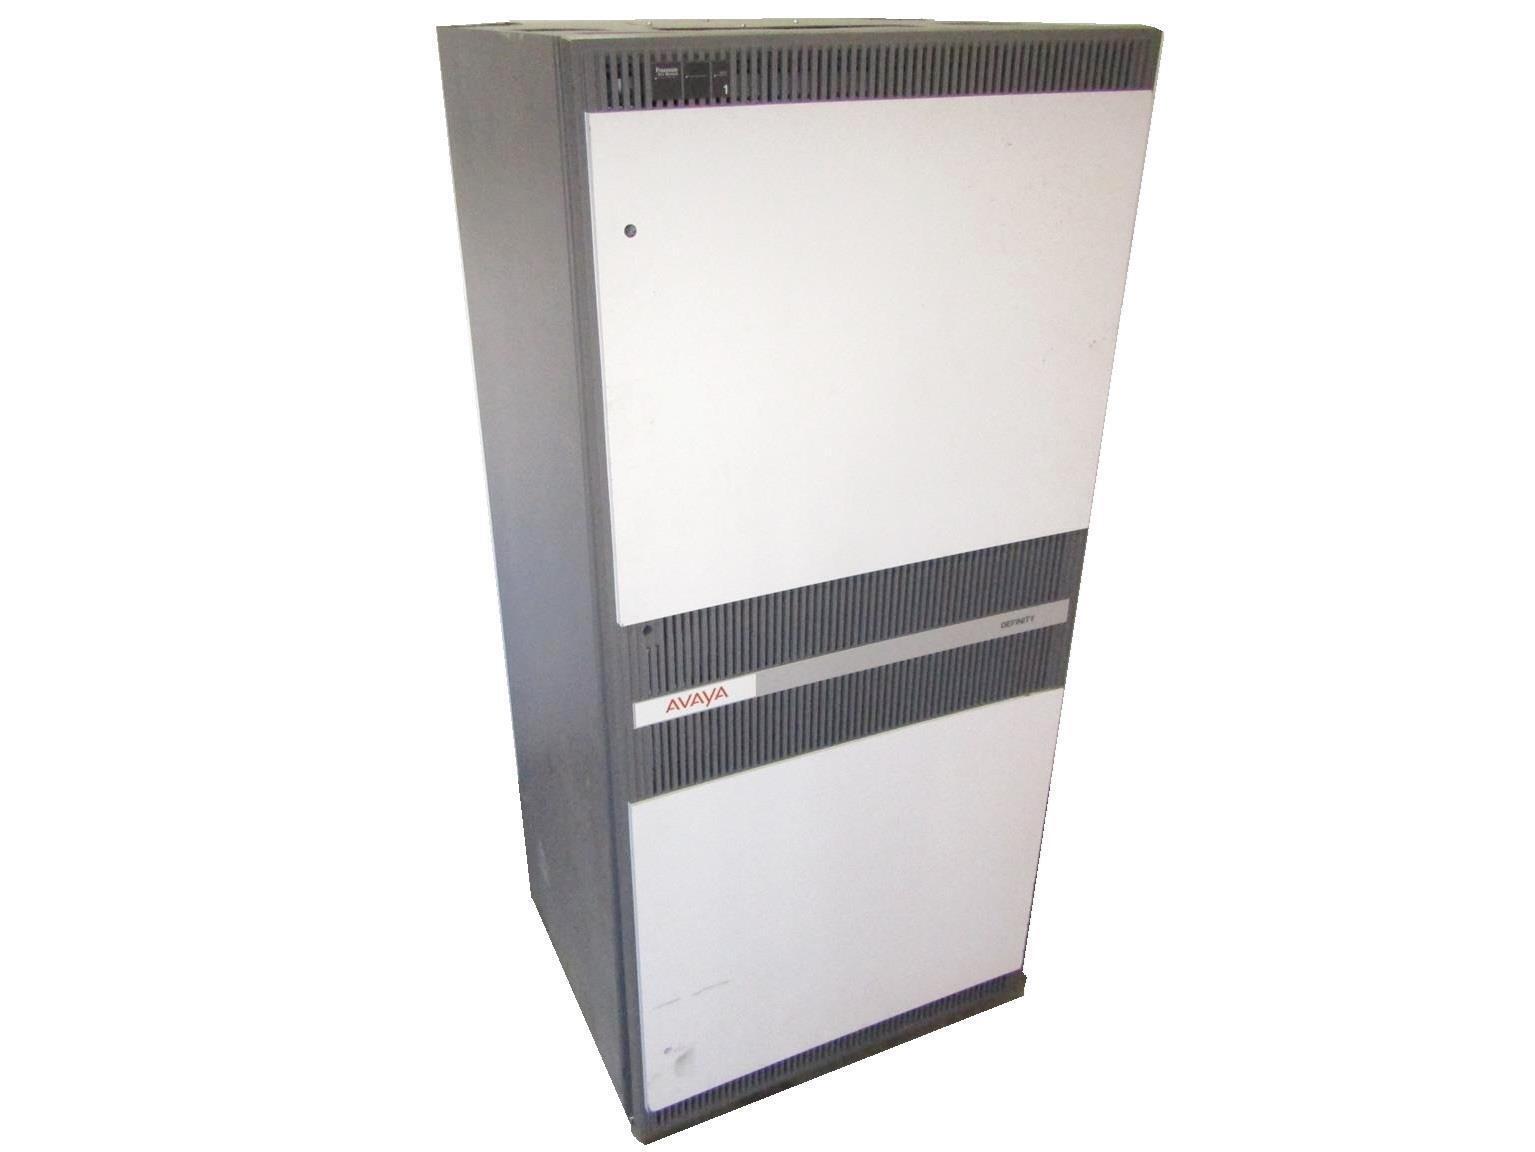 1x Avaya Definity J58890A-2 Multicarrier Telephone Cabinet Rack with Modules